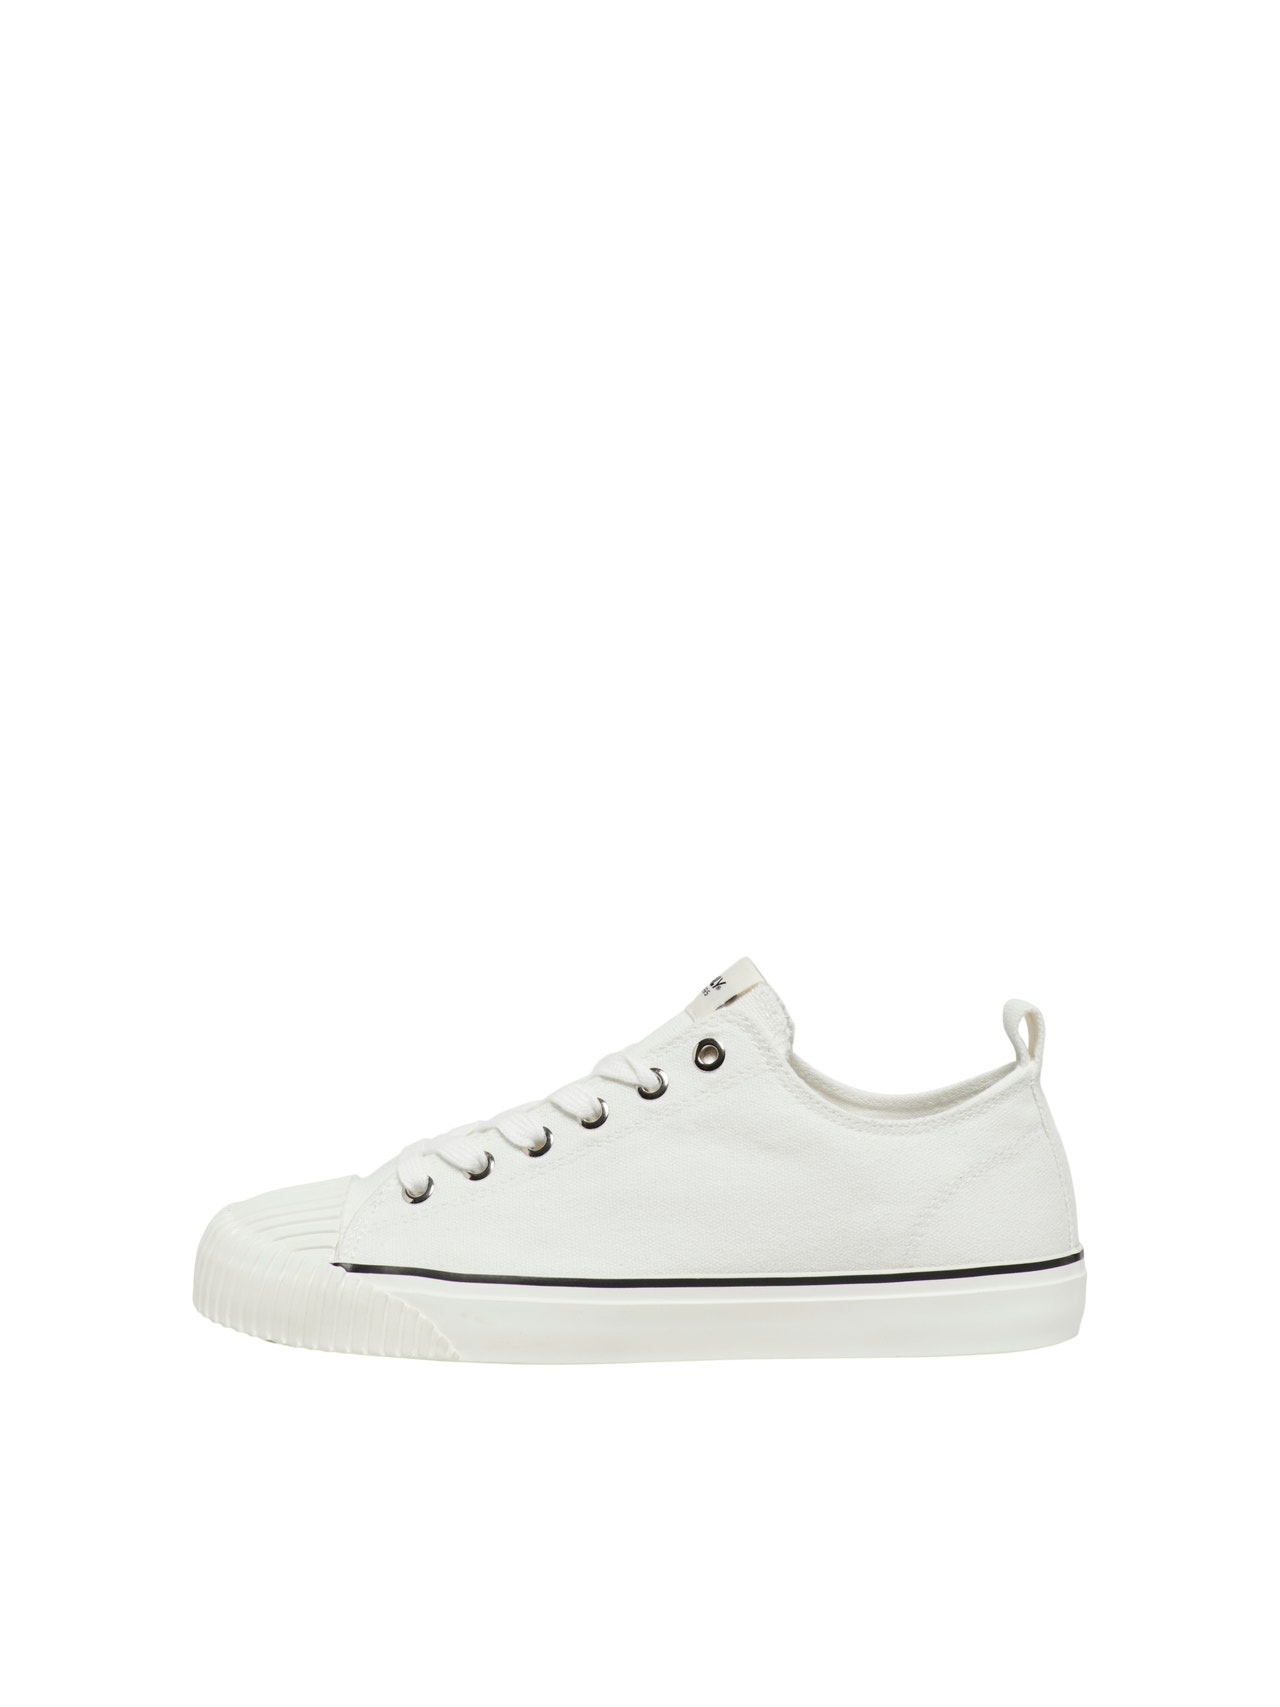 ONLY Canvas low sneakers -White - 15304619